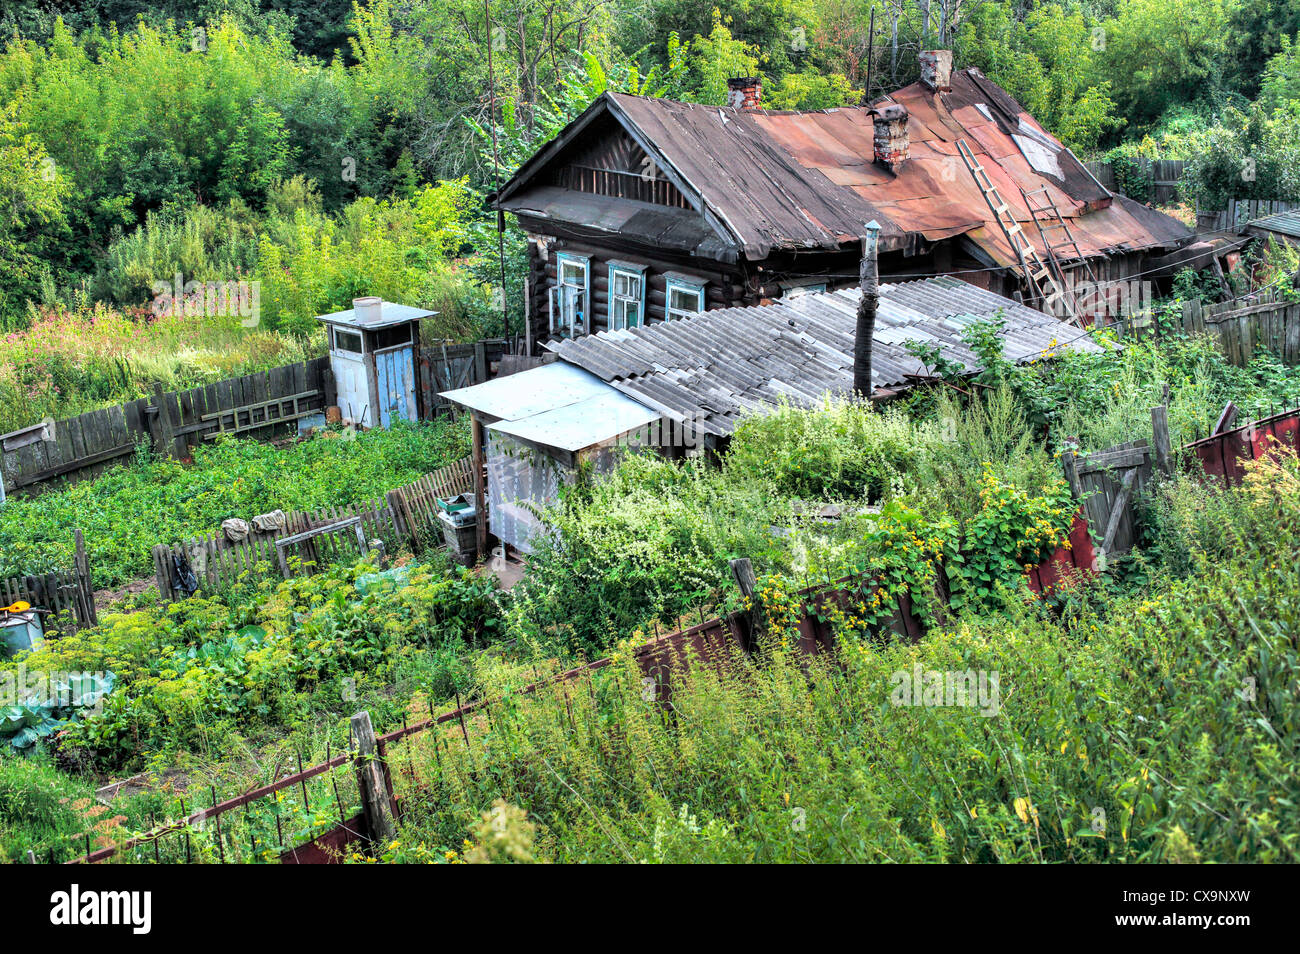 Old wooden house, Murom, Vladimir region, Russia Stock Photo